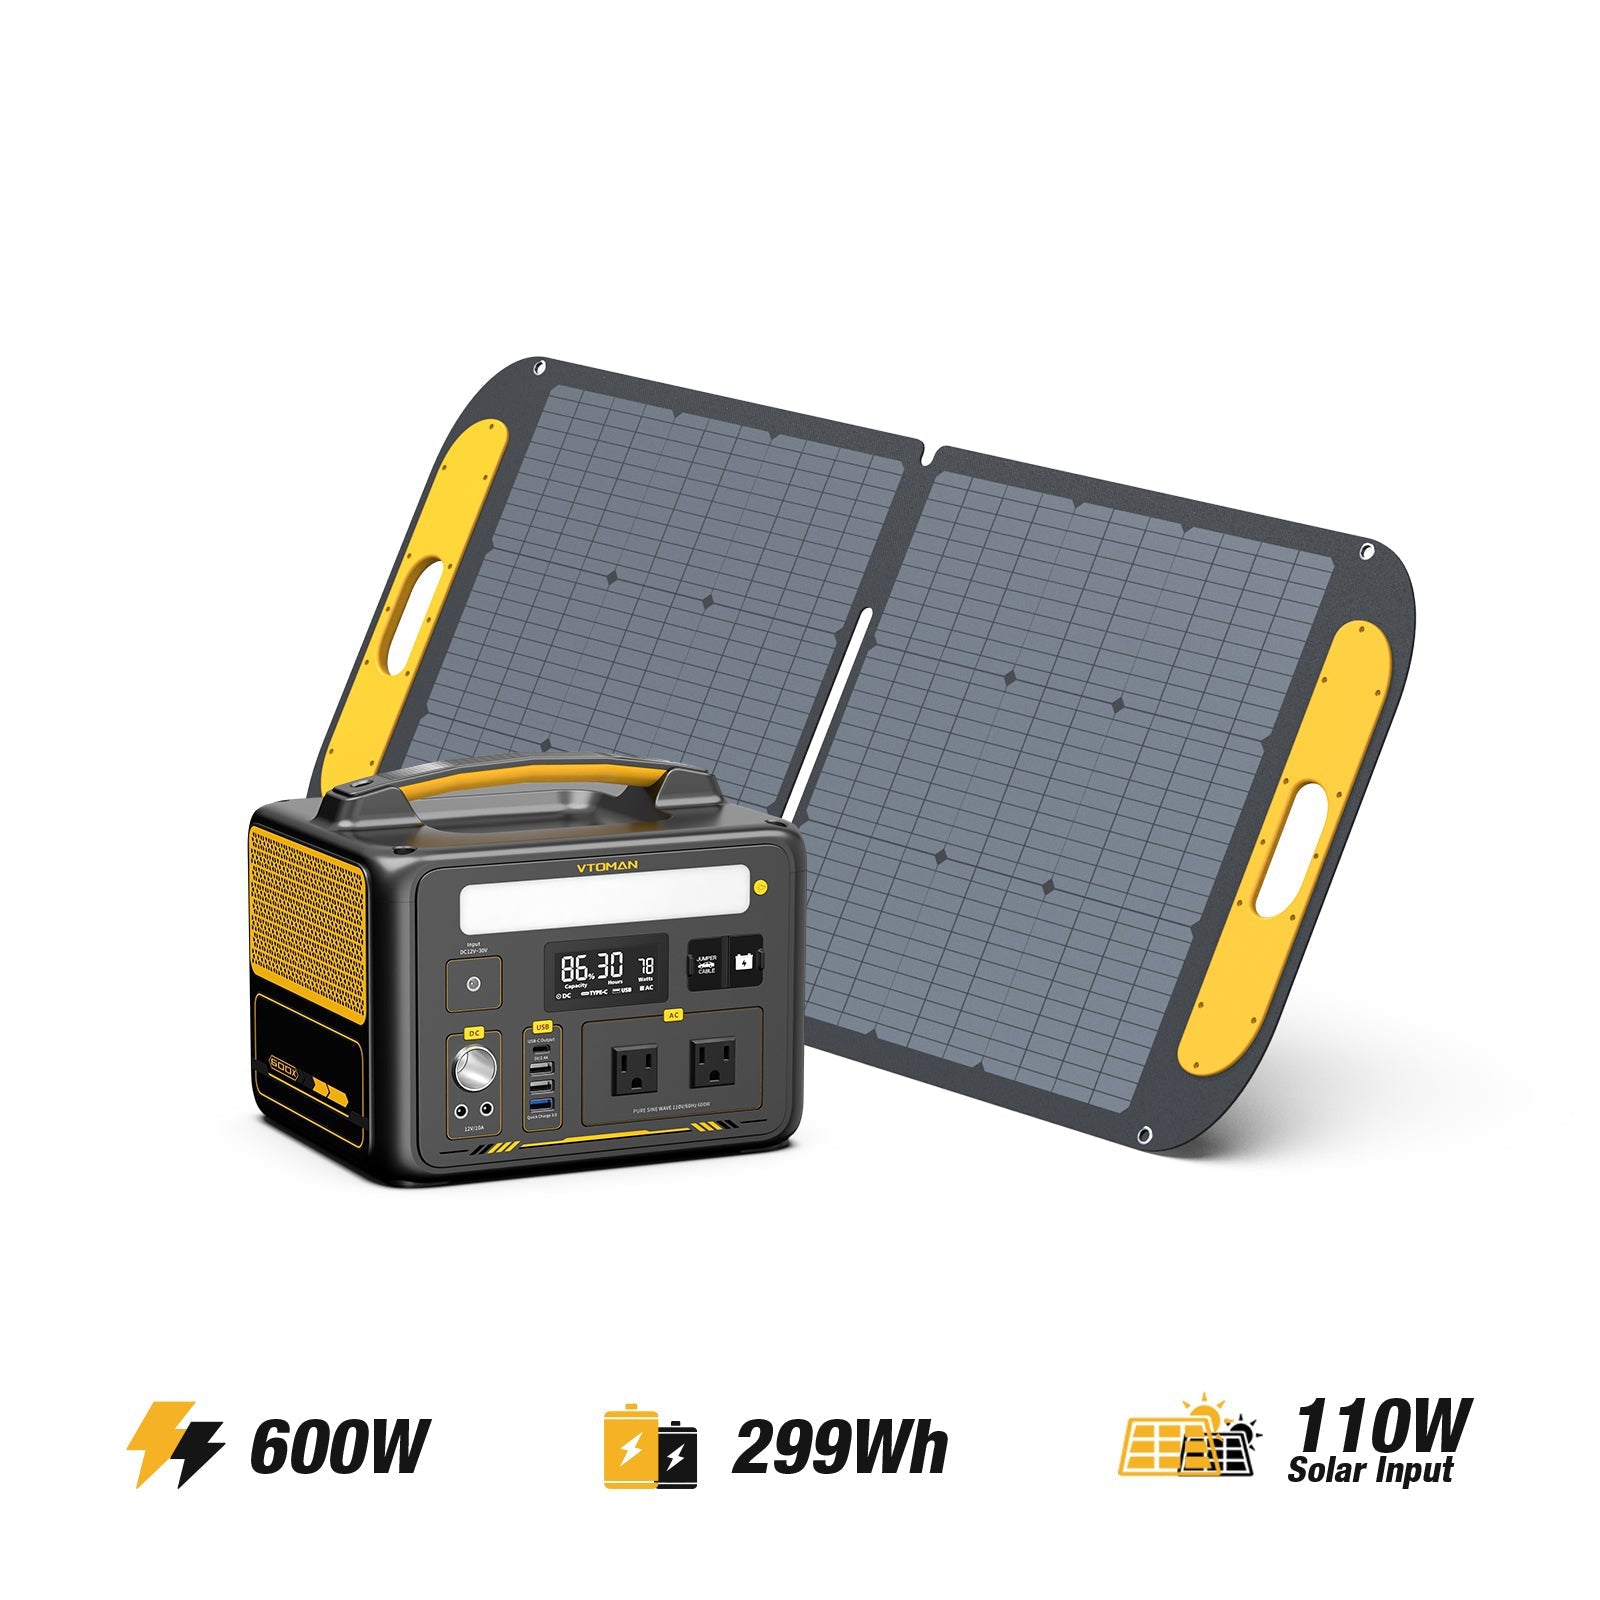 Reliable Solar Generator-for both indoor use and off-grid activities